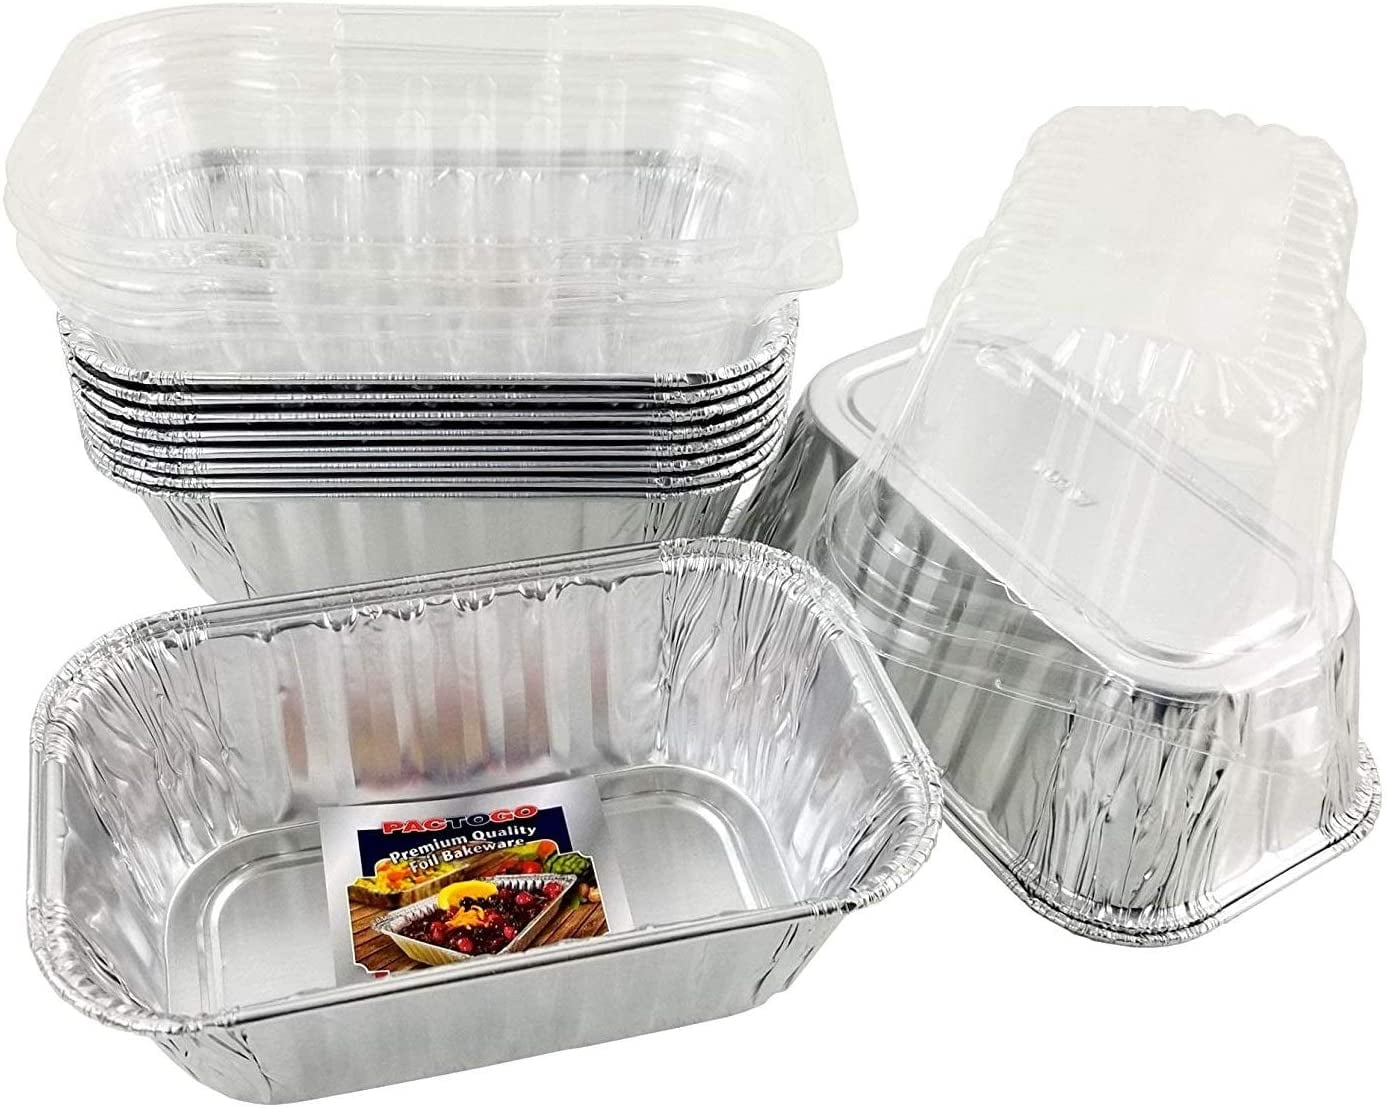 Mainstays Aluminum Mini Loaf Pans, 5 Count Disposable for Easy Cleaning  5.72 x 3.31 x 1.88 